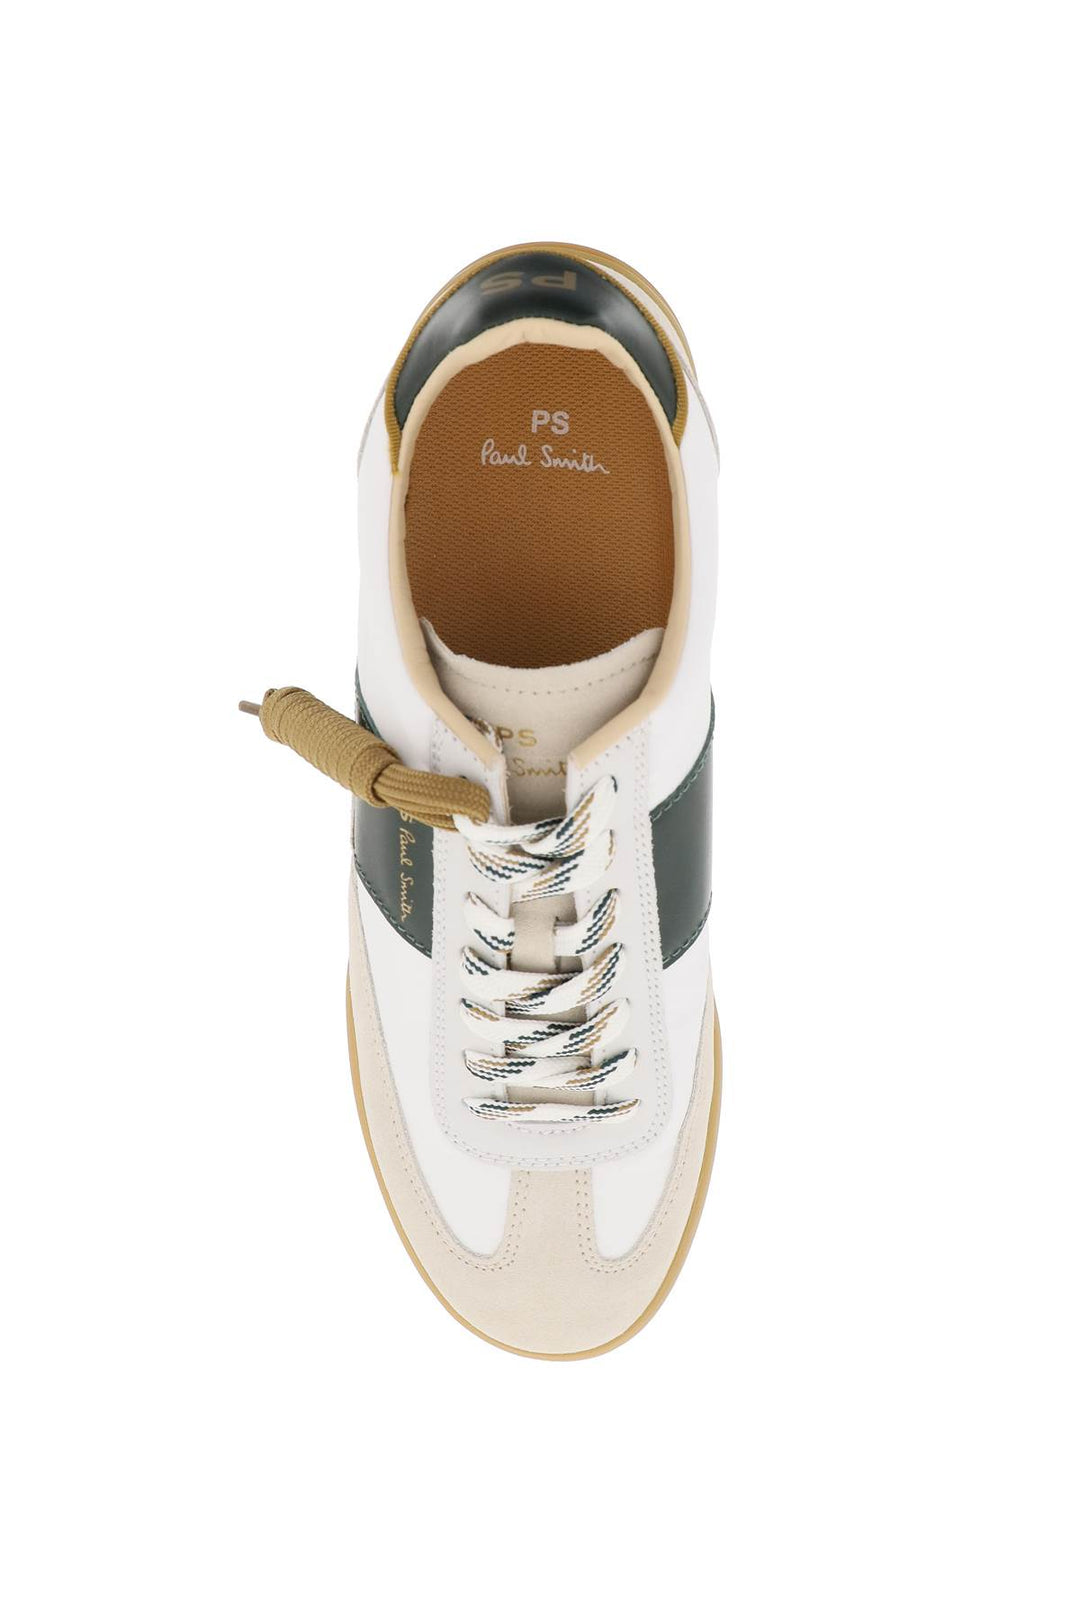 Ps Paul Smith Leather And Nylon Dover Sneakers In   White